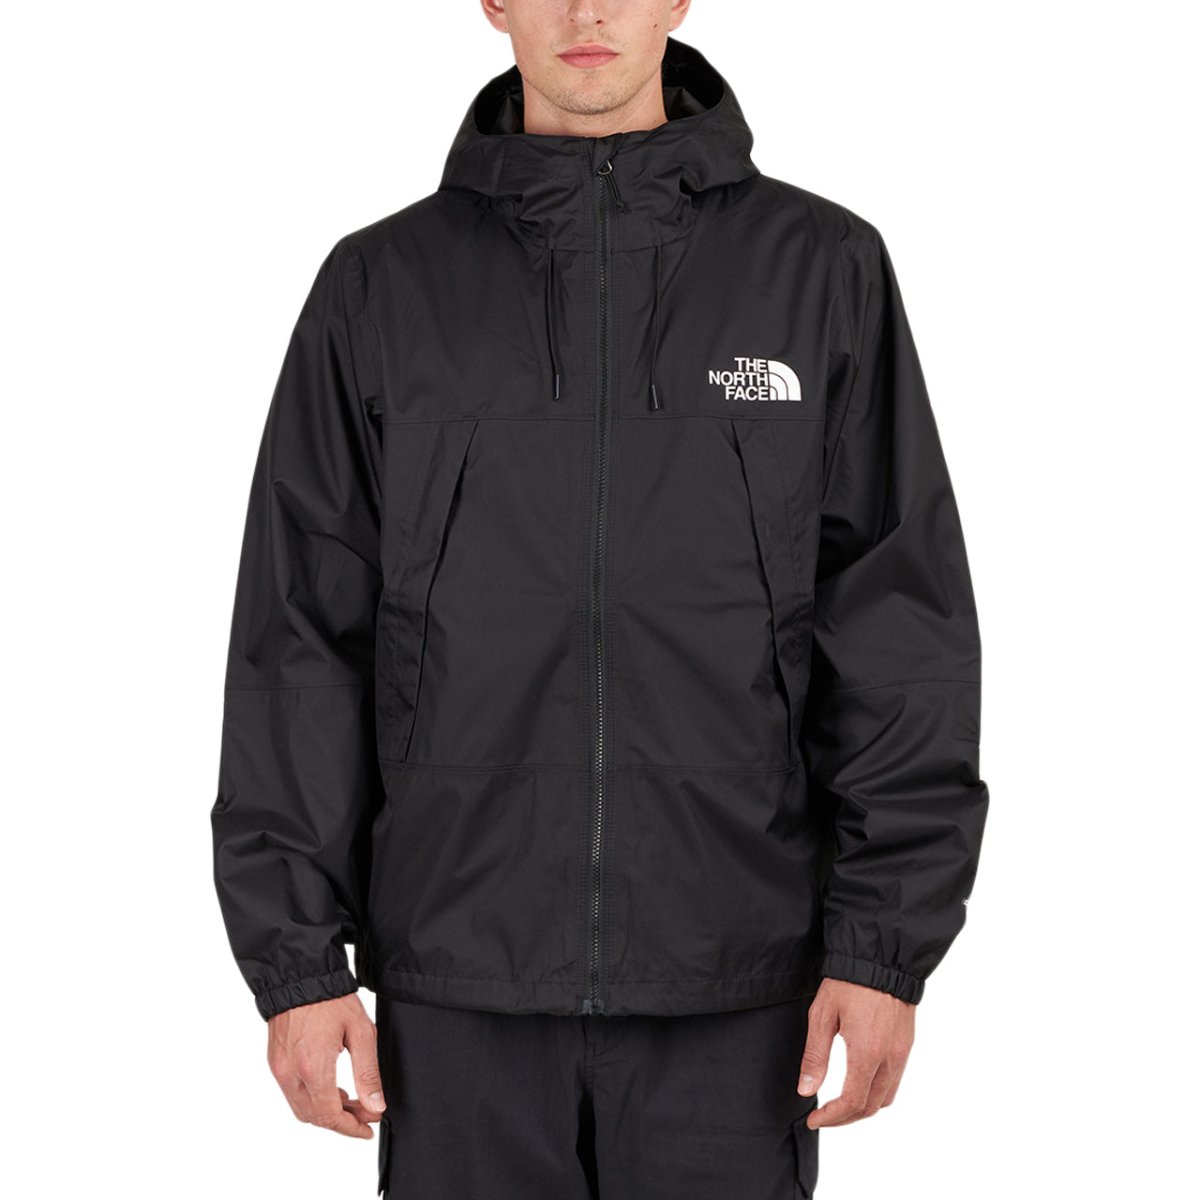 The North Face 1990 Mountain Q Jacket (Schwarz)  - Allike Store